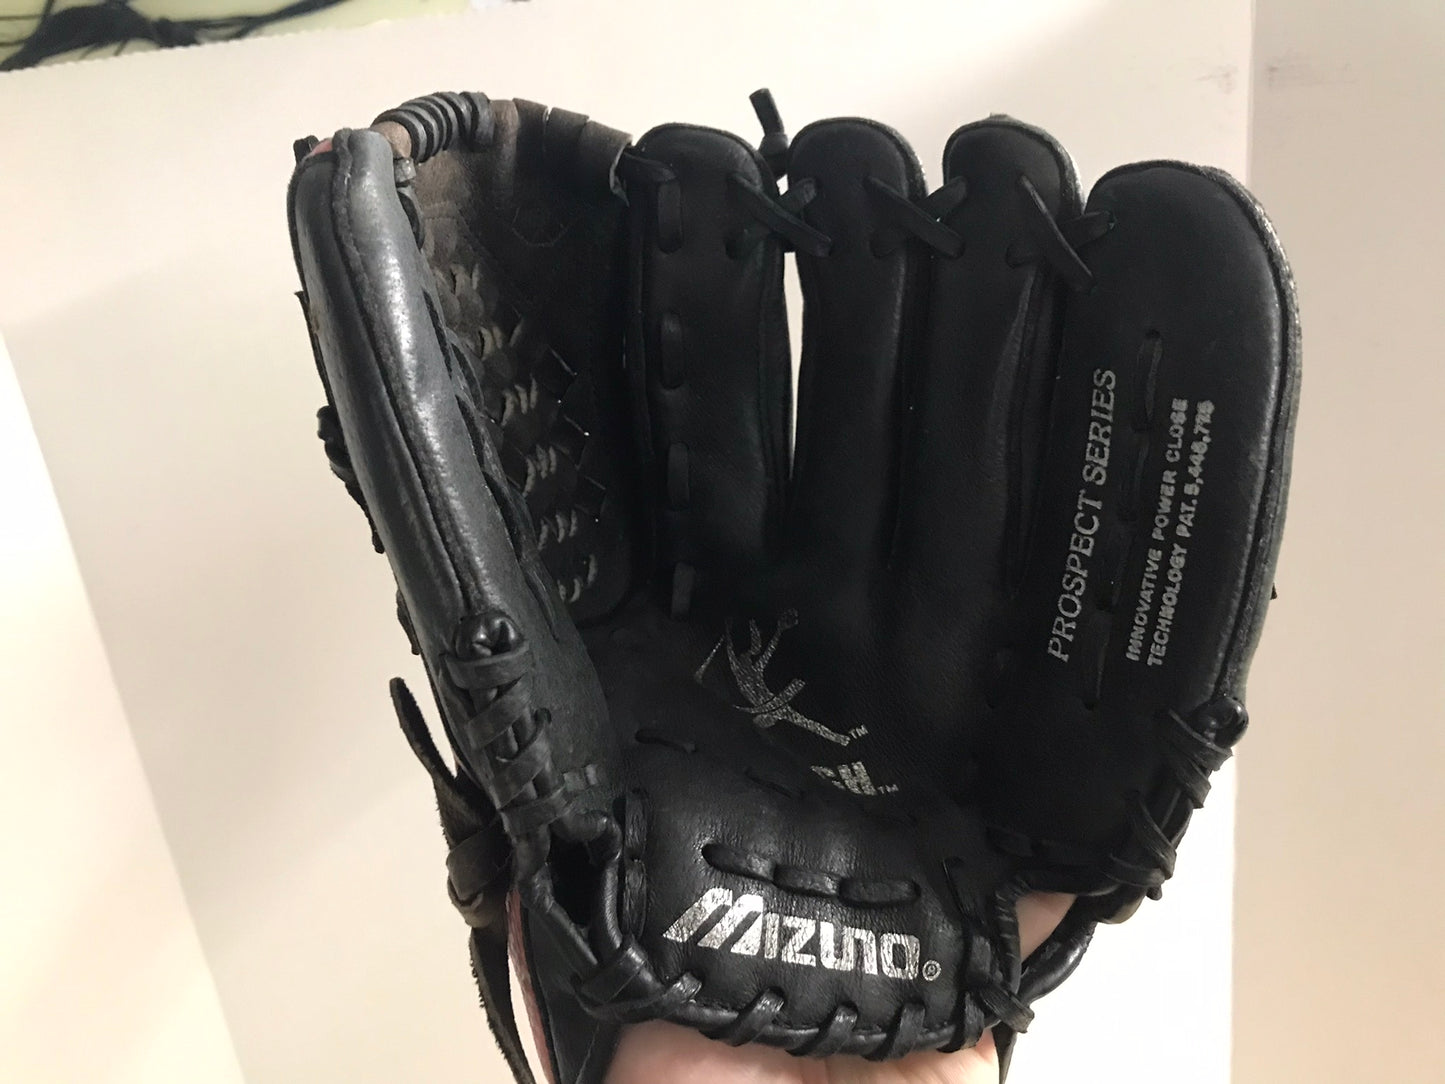 Baseball Glove Adult Size 11 inch Mizuno Black Pink Leather Fits on Left Hand